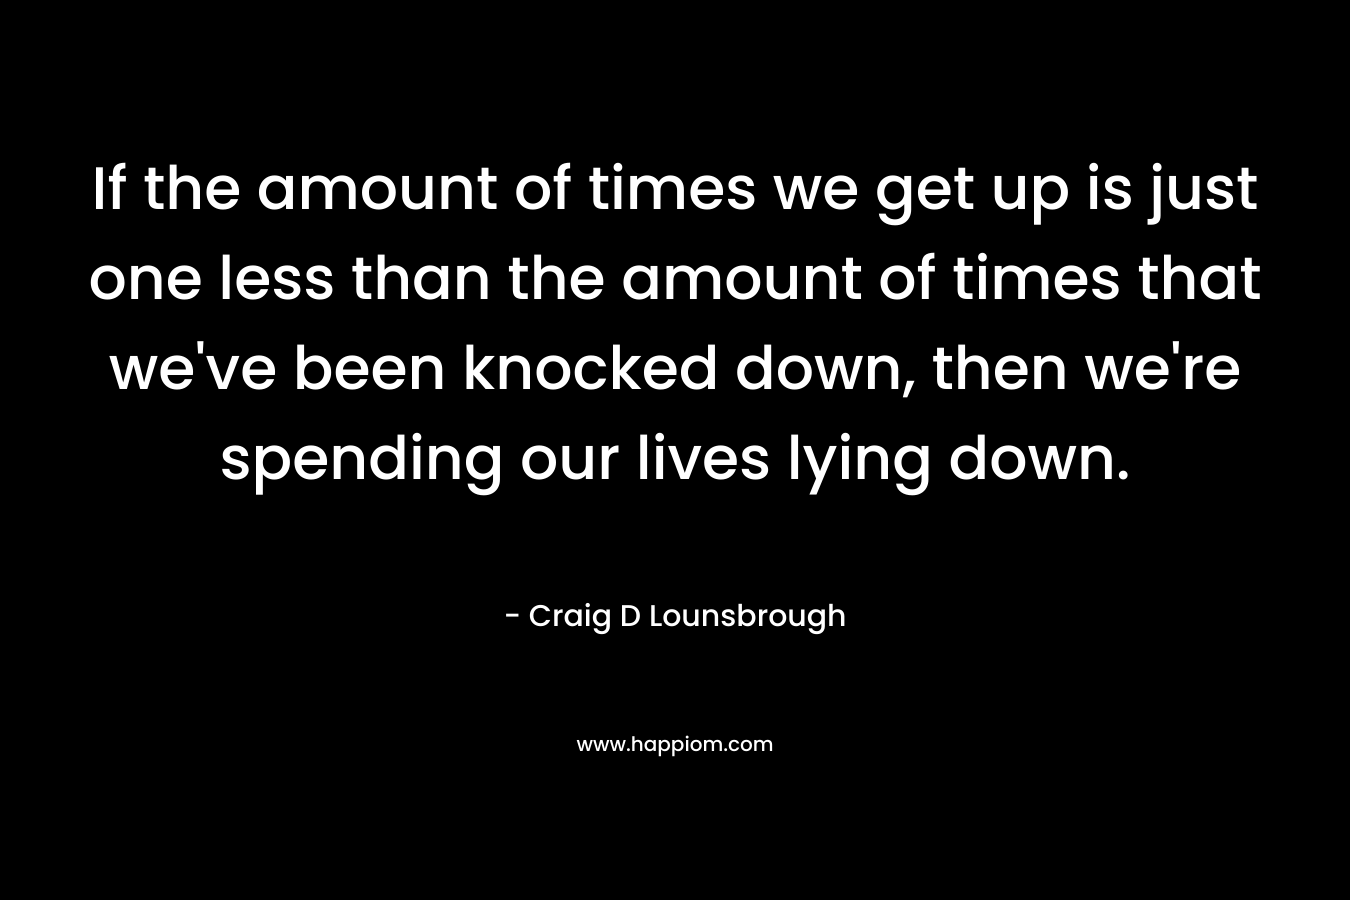 If the amount of times we get up is just one less than the amount of times that we've been knocked down, then we're spending our lives lying down.